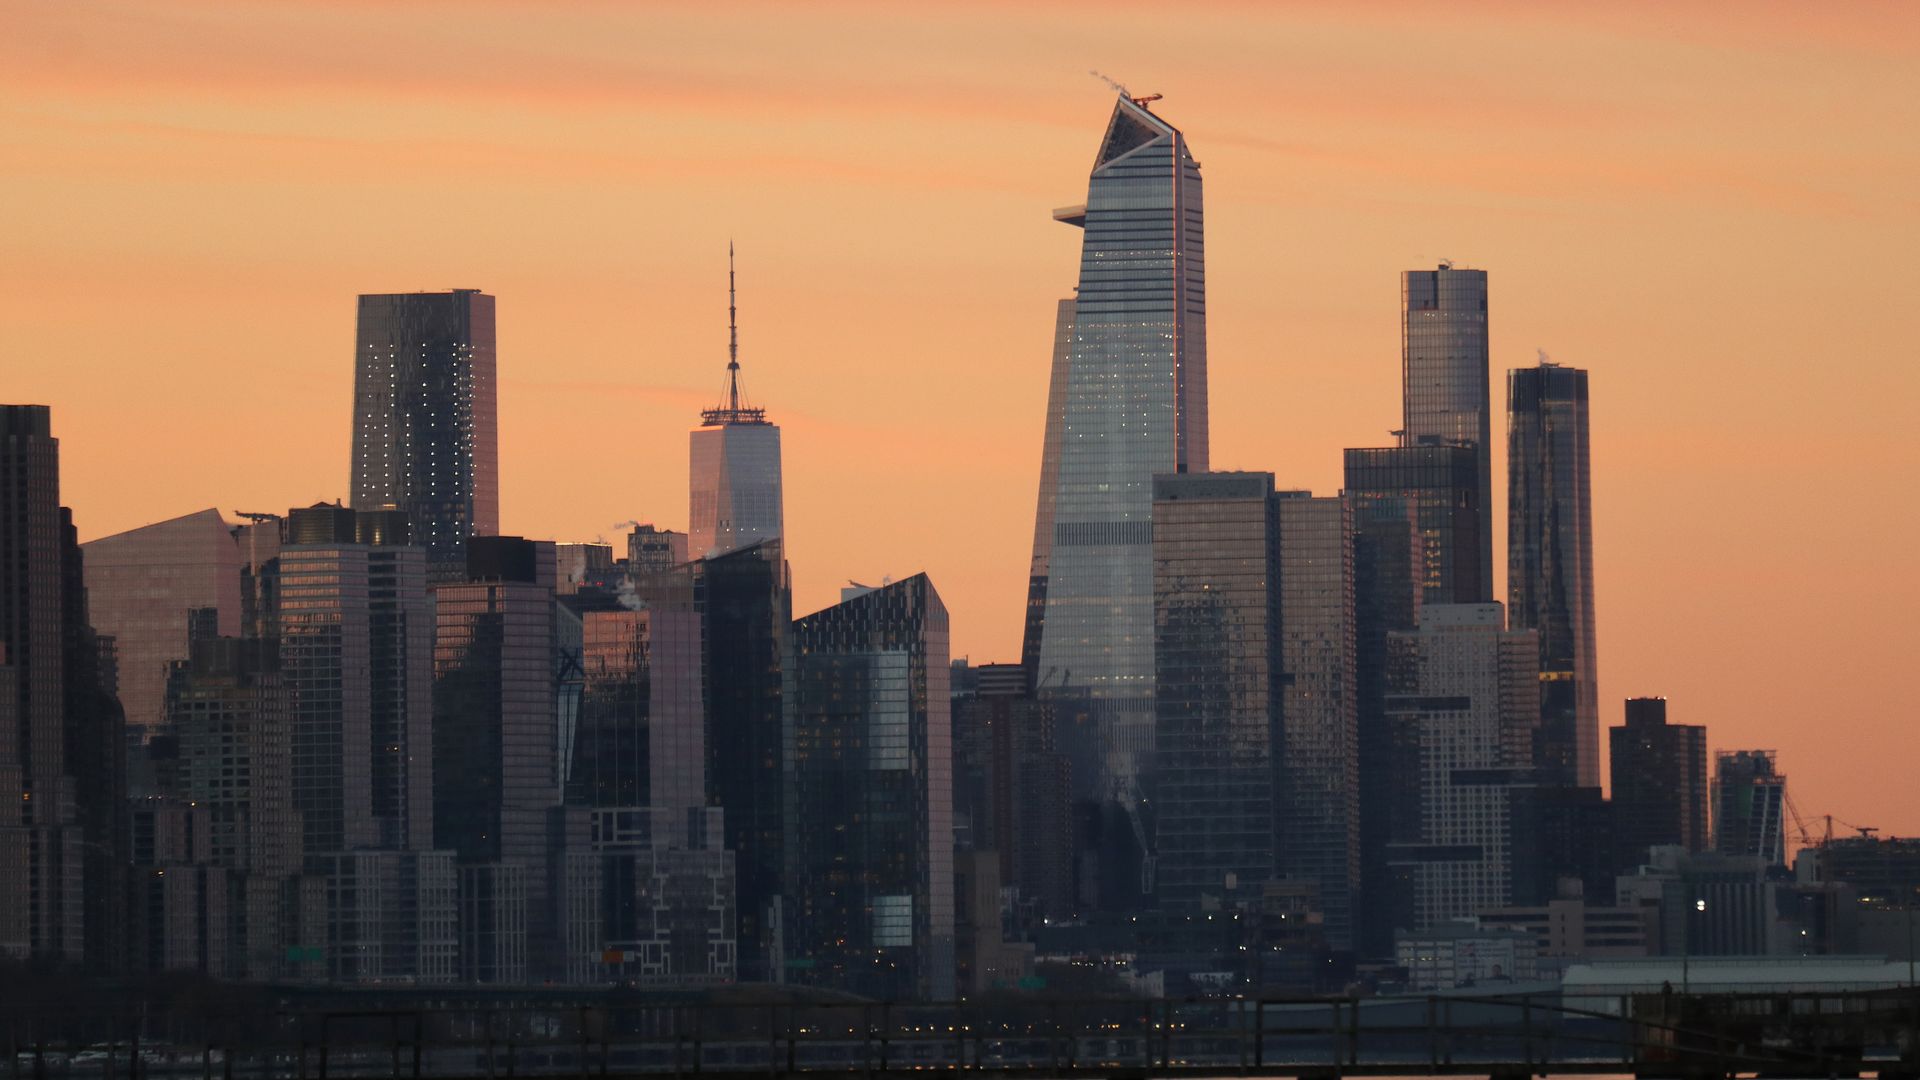  The westside of Manhattan, One World Trade Center and Hudson Yards